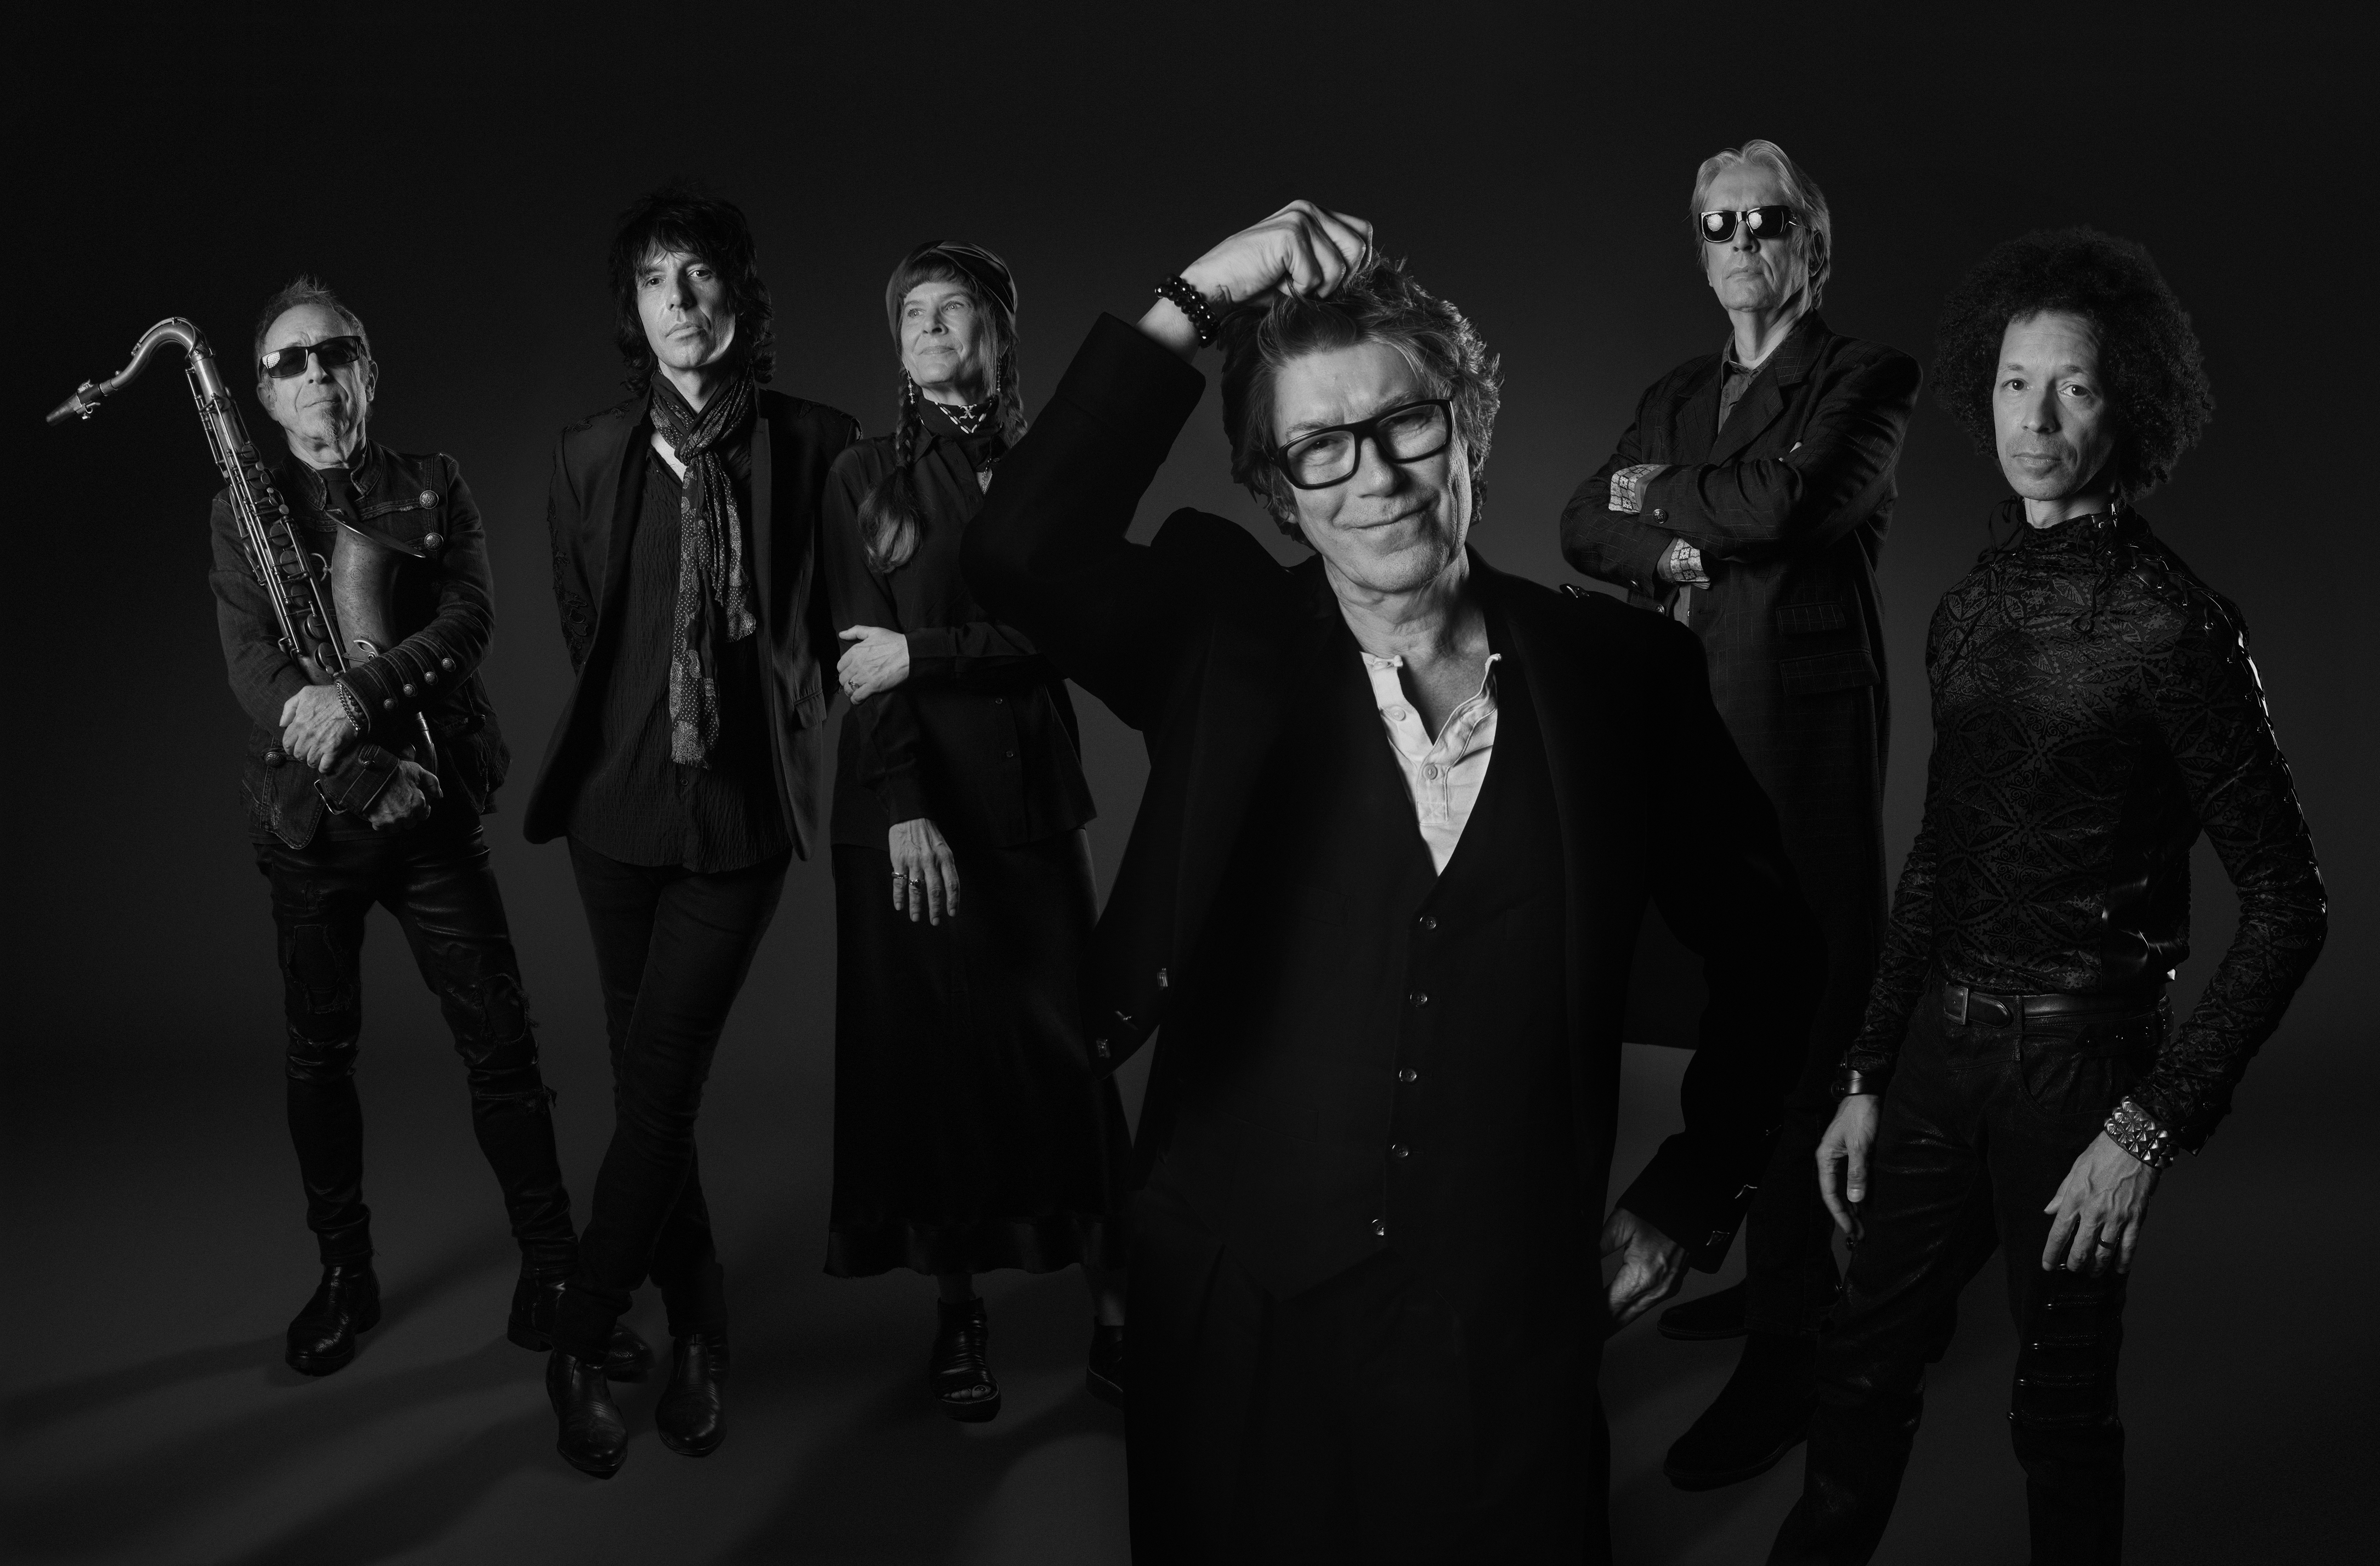 The Psychedelic Furs, which released “Made of Rain, ”its first album in 29 years in July 2020, performs with X at Rose Music Center in Huber Heights on Wednesday, July 6.